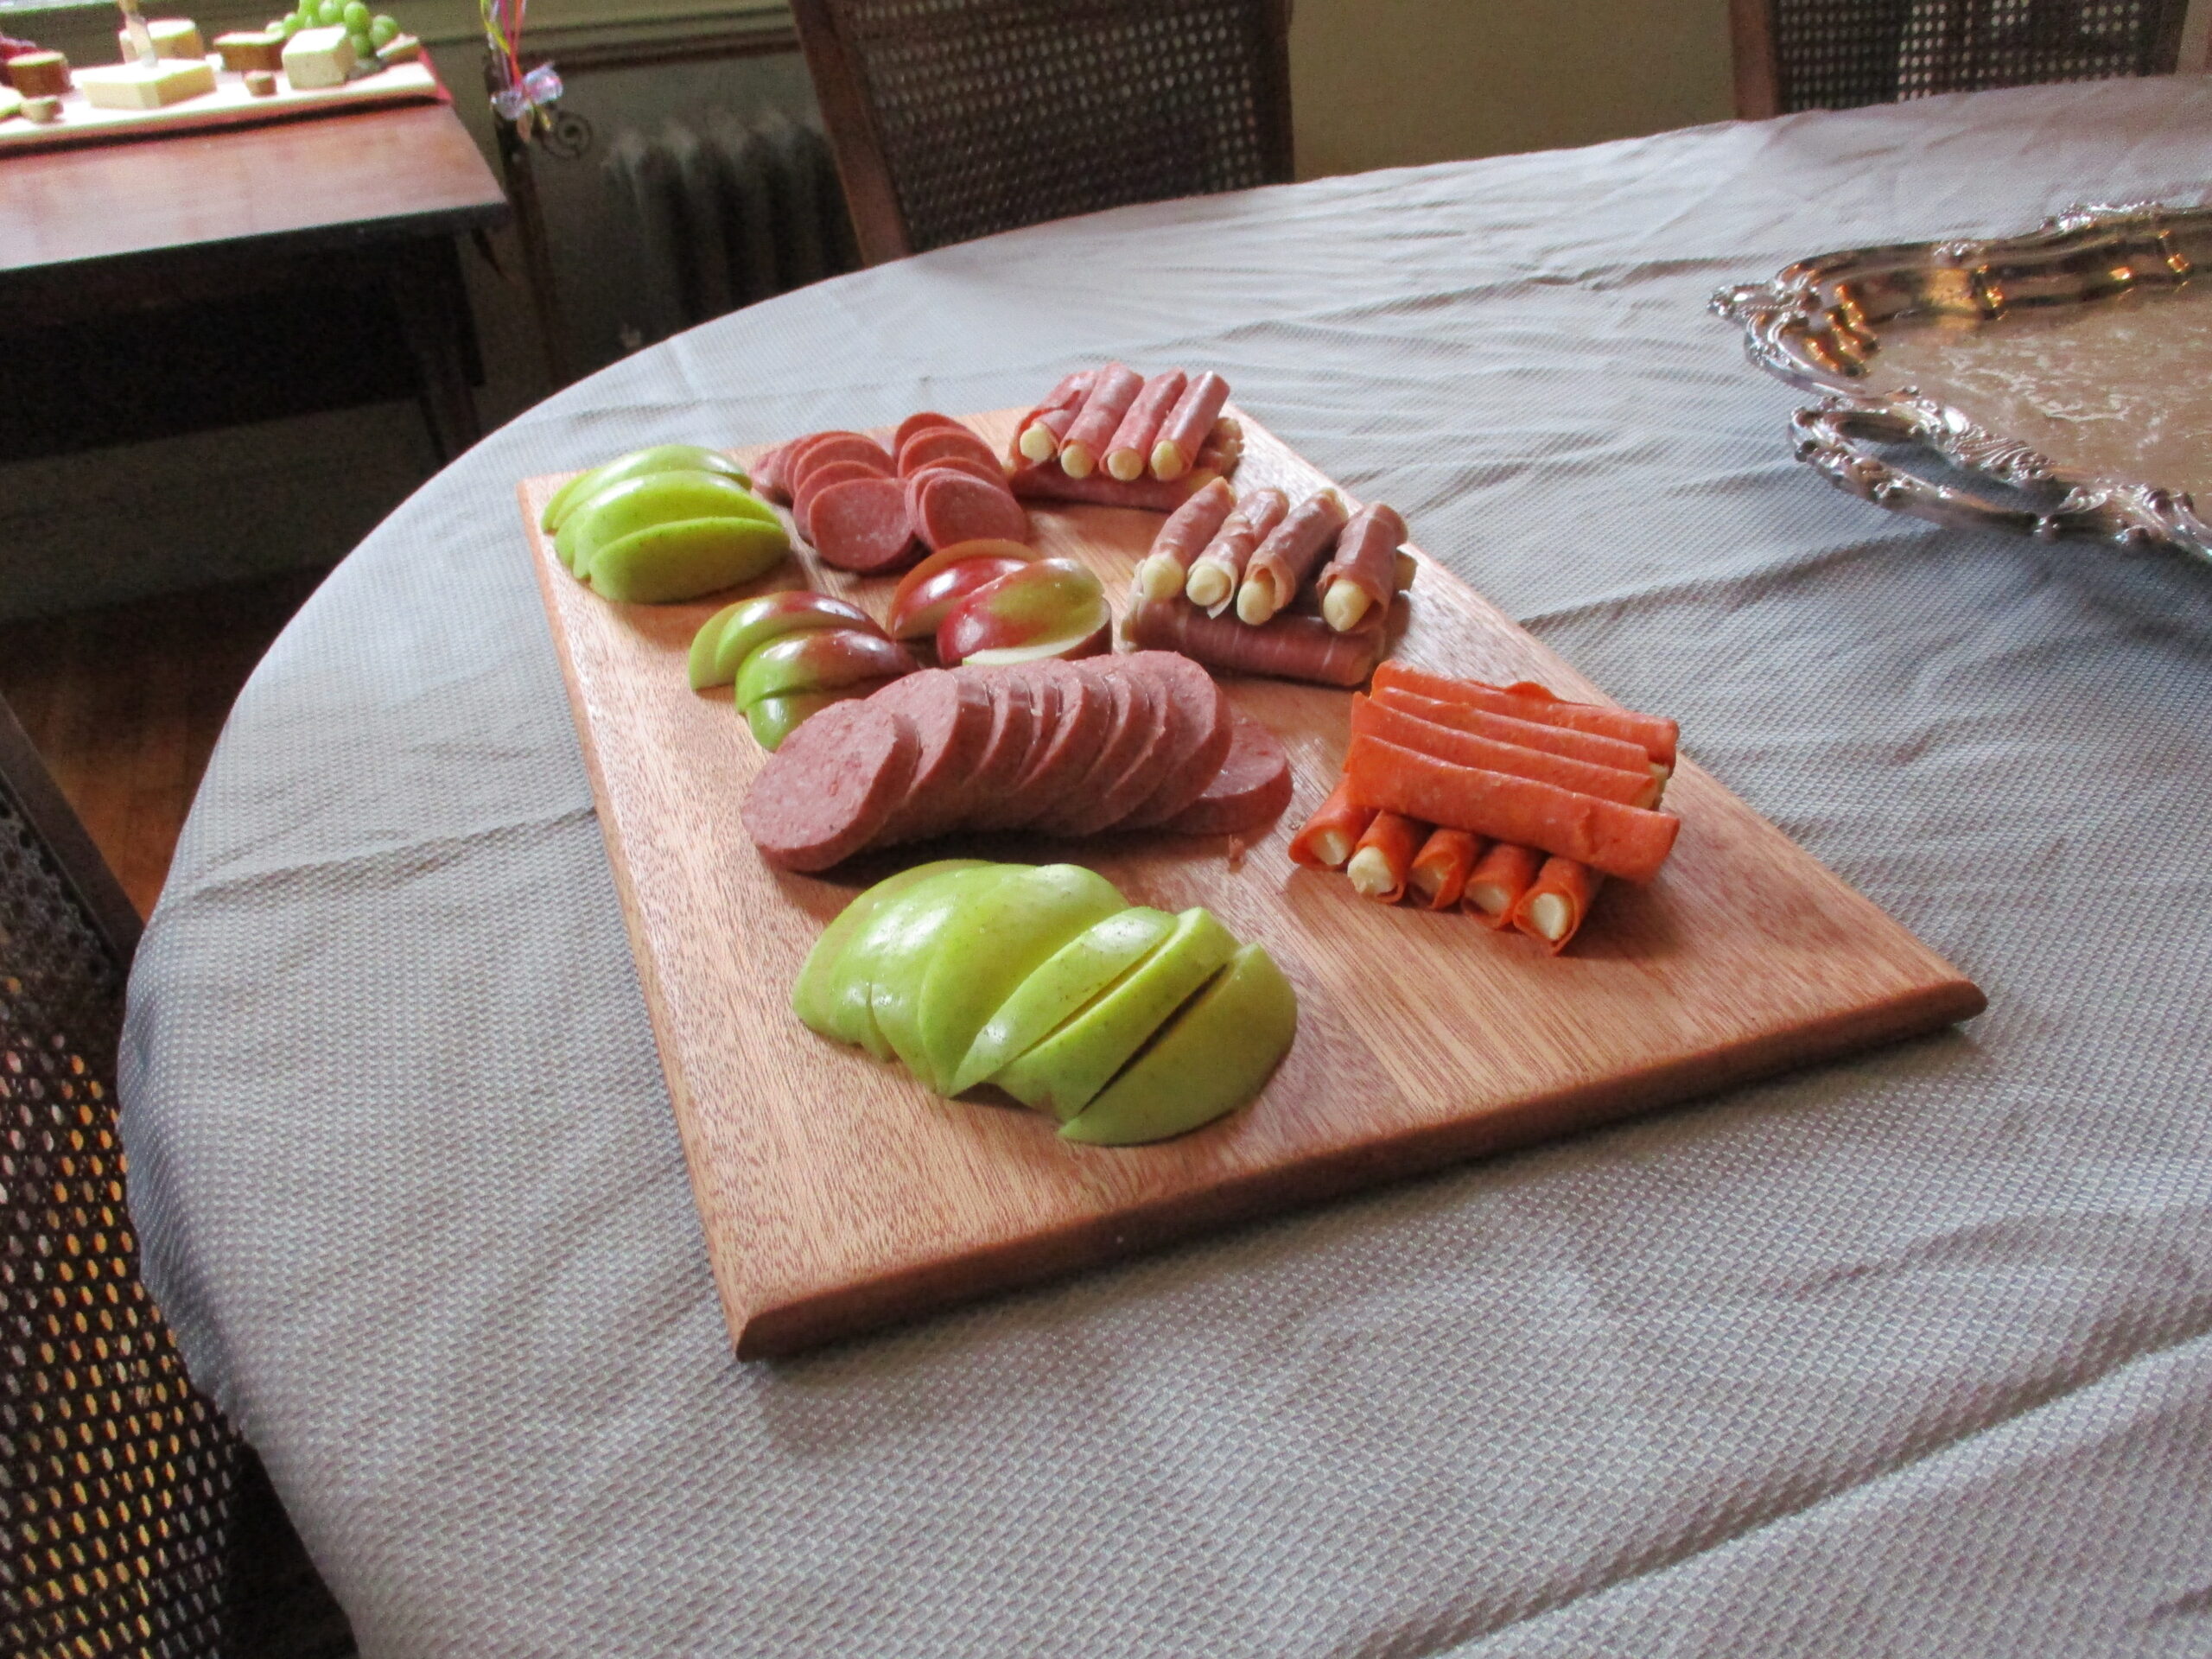 Custom all Mahogany cutting board/charcuterie board as a housewarming gift pictured with fruit and cured meats.